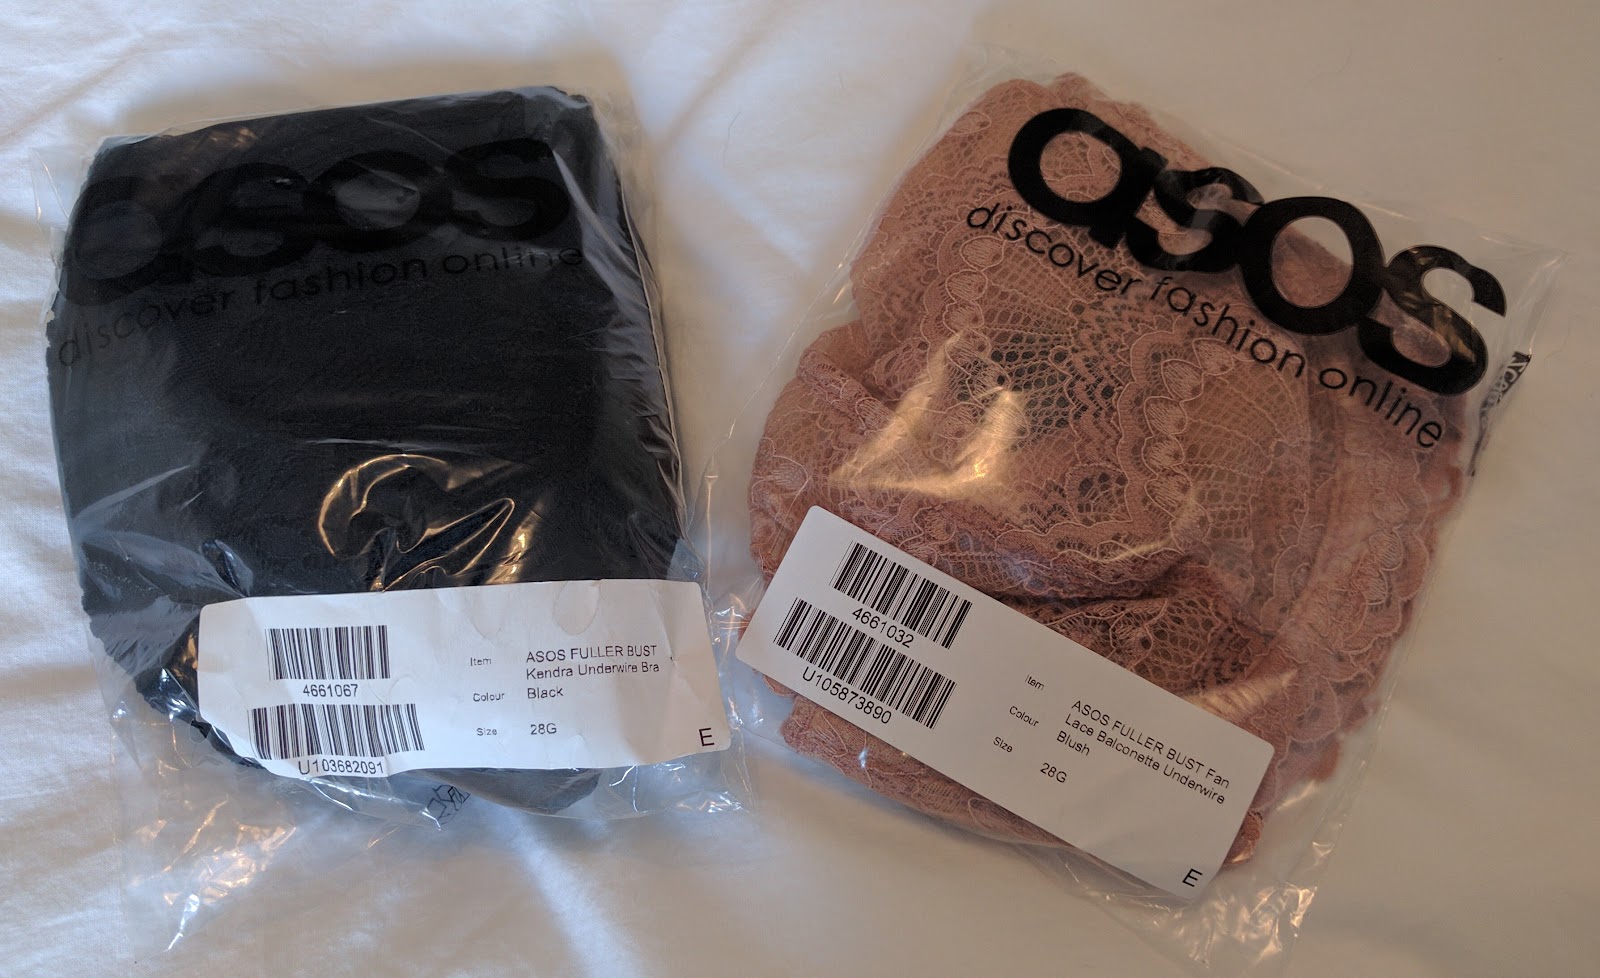 Asos: You Tried — Asos Fuller Bust Kendra Review in 28G